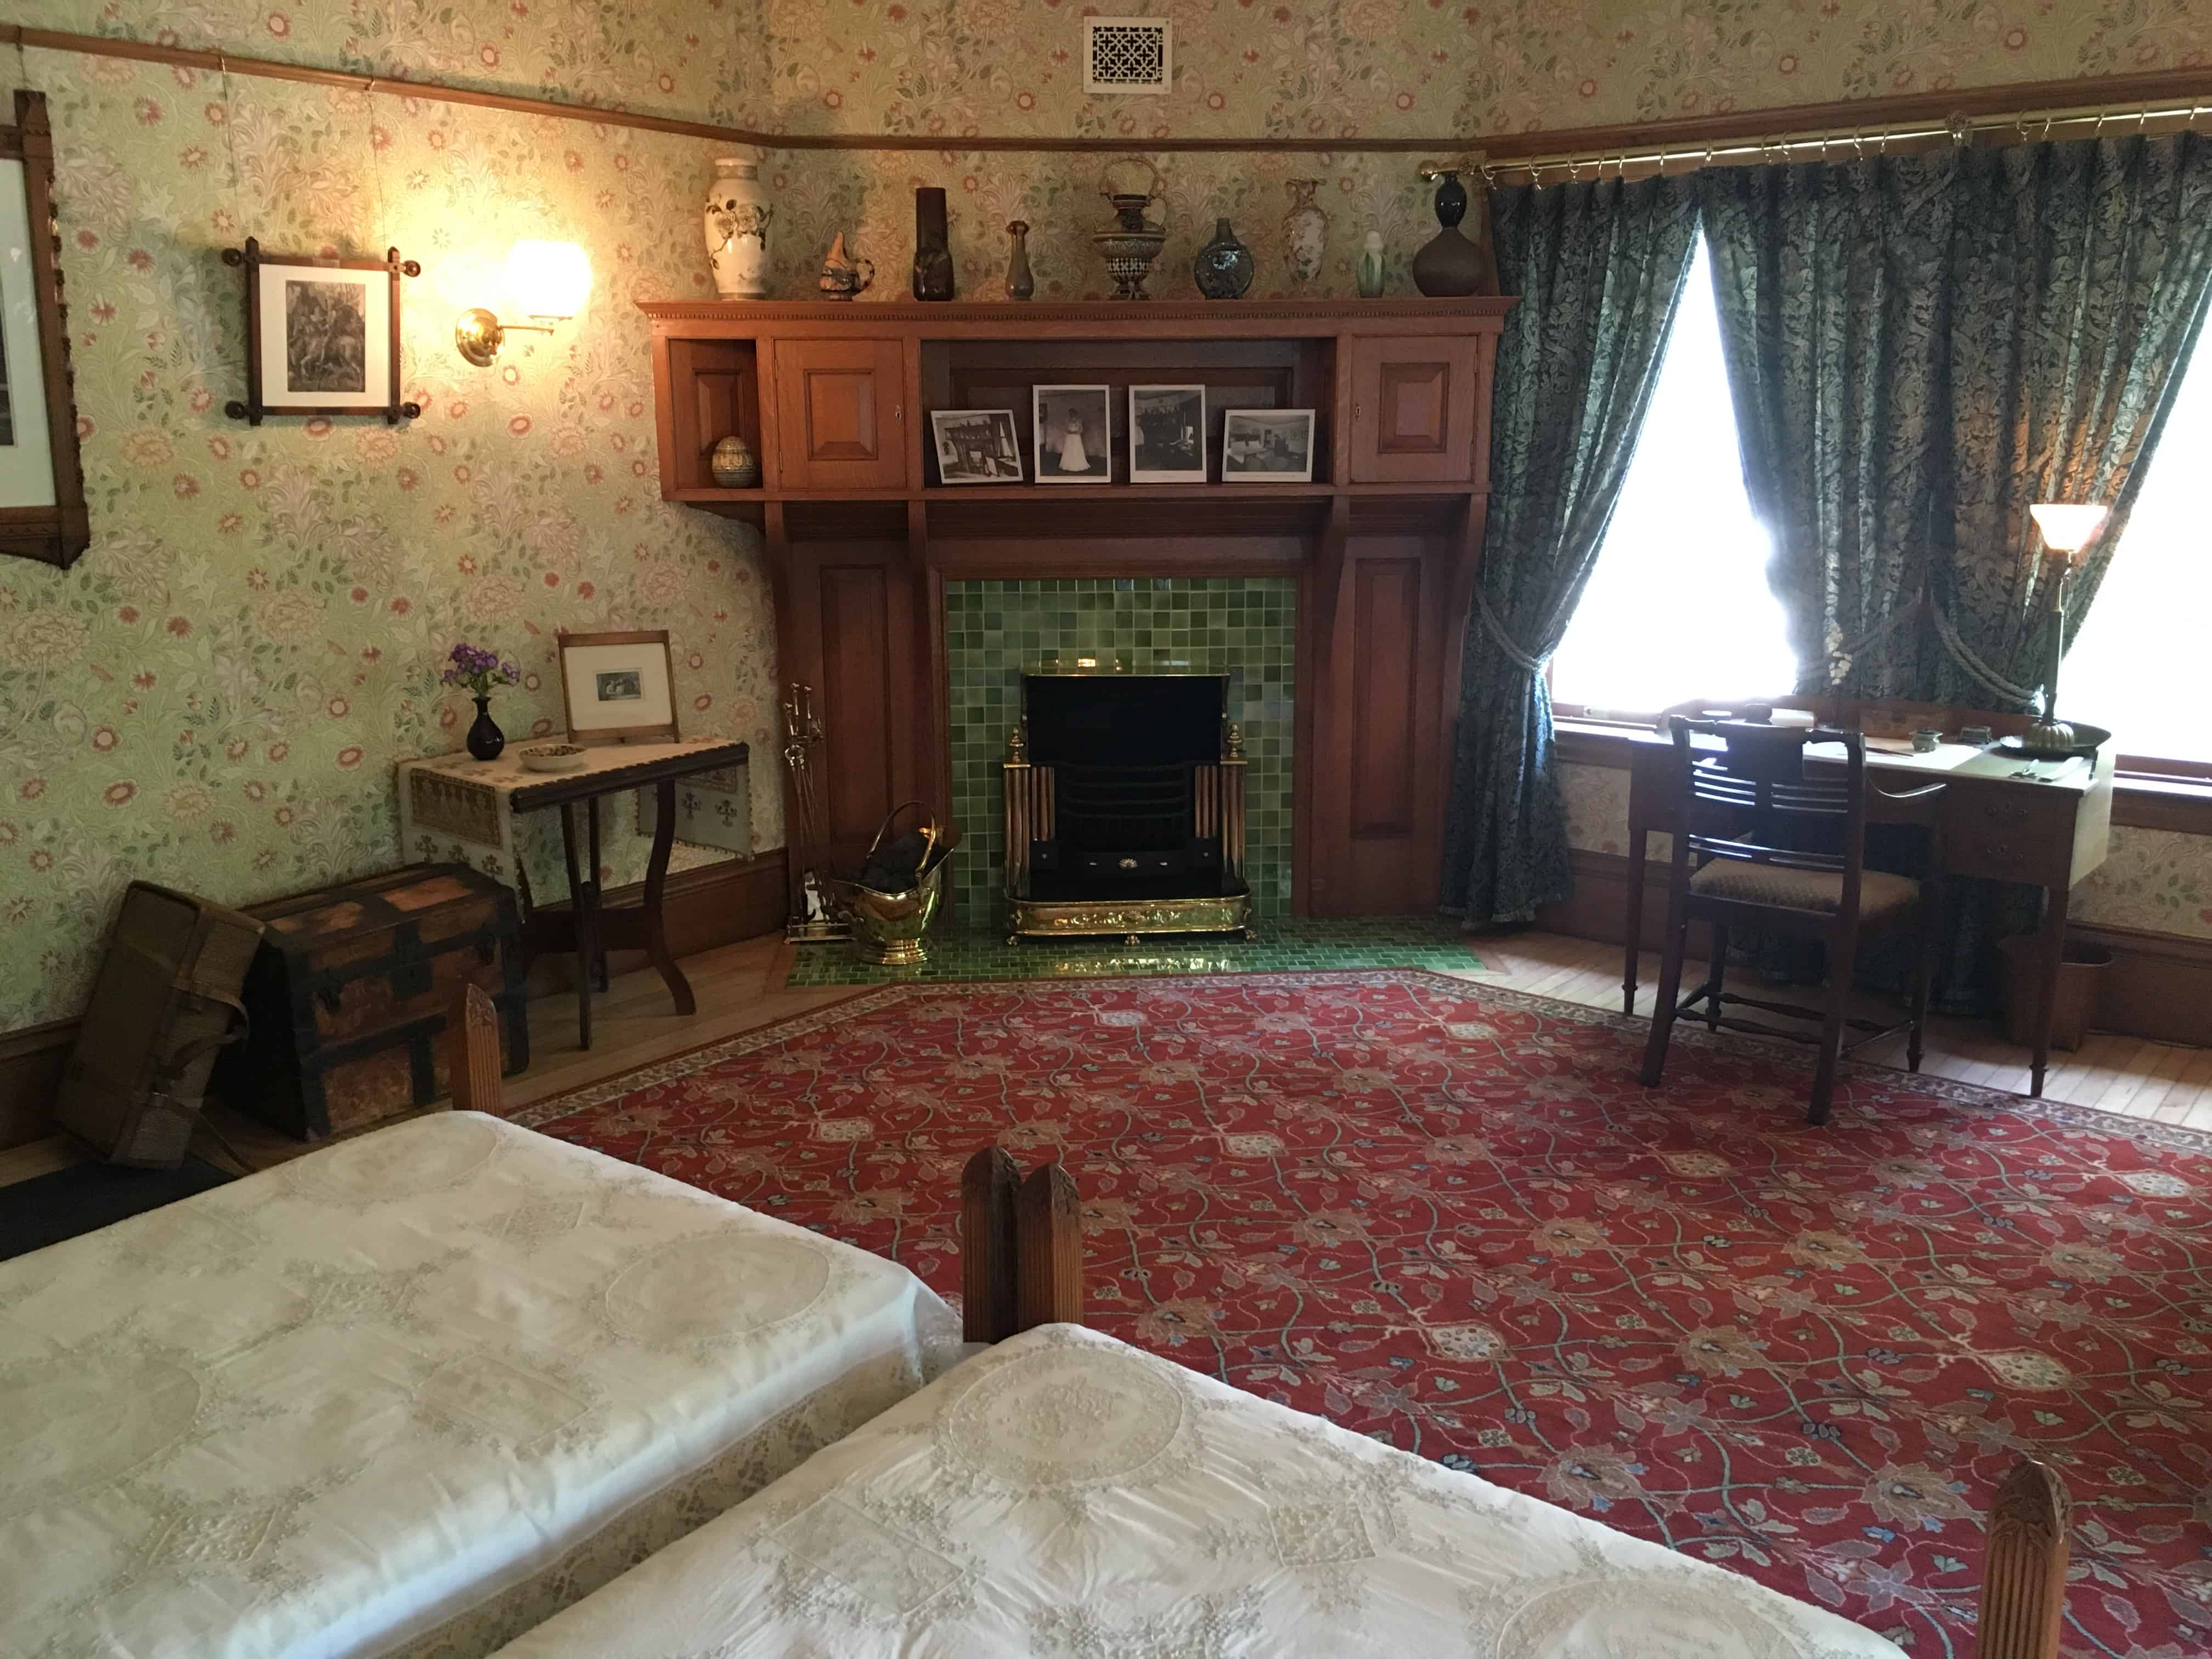 Guest room at the John J. Glessner House in Chicago, Illinois